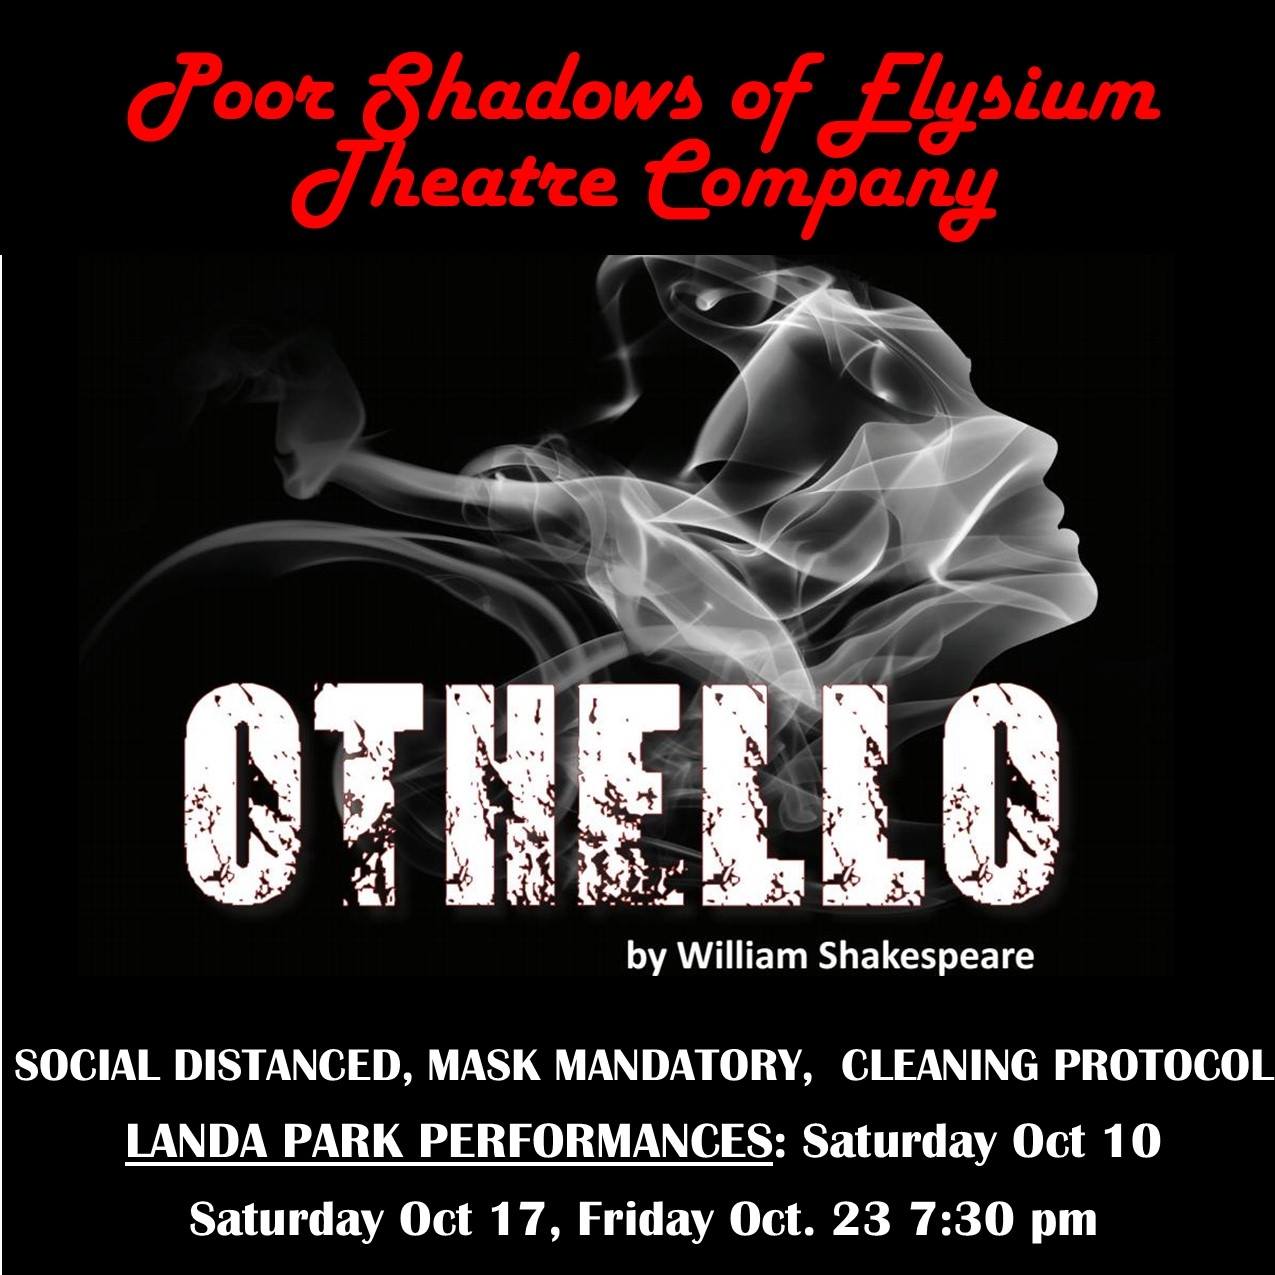 Othello by Poor Shadows of Elysium